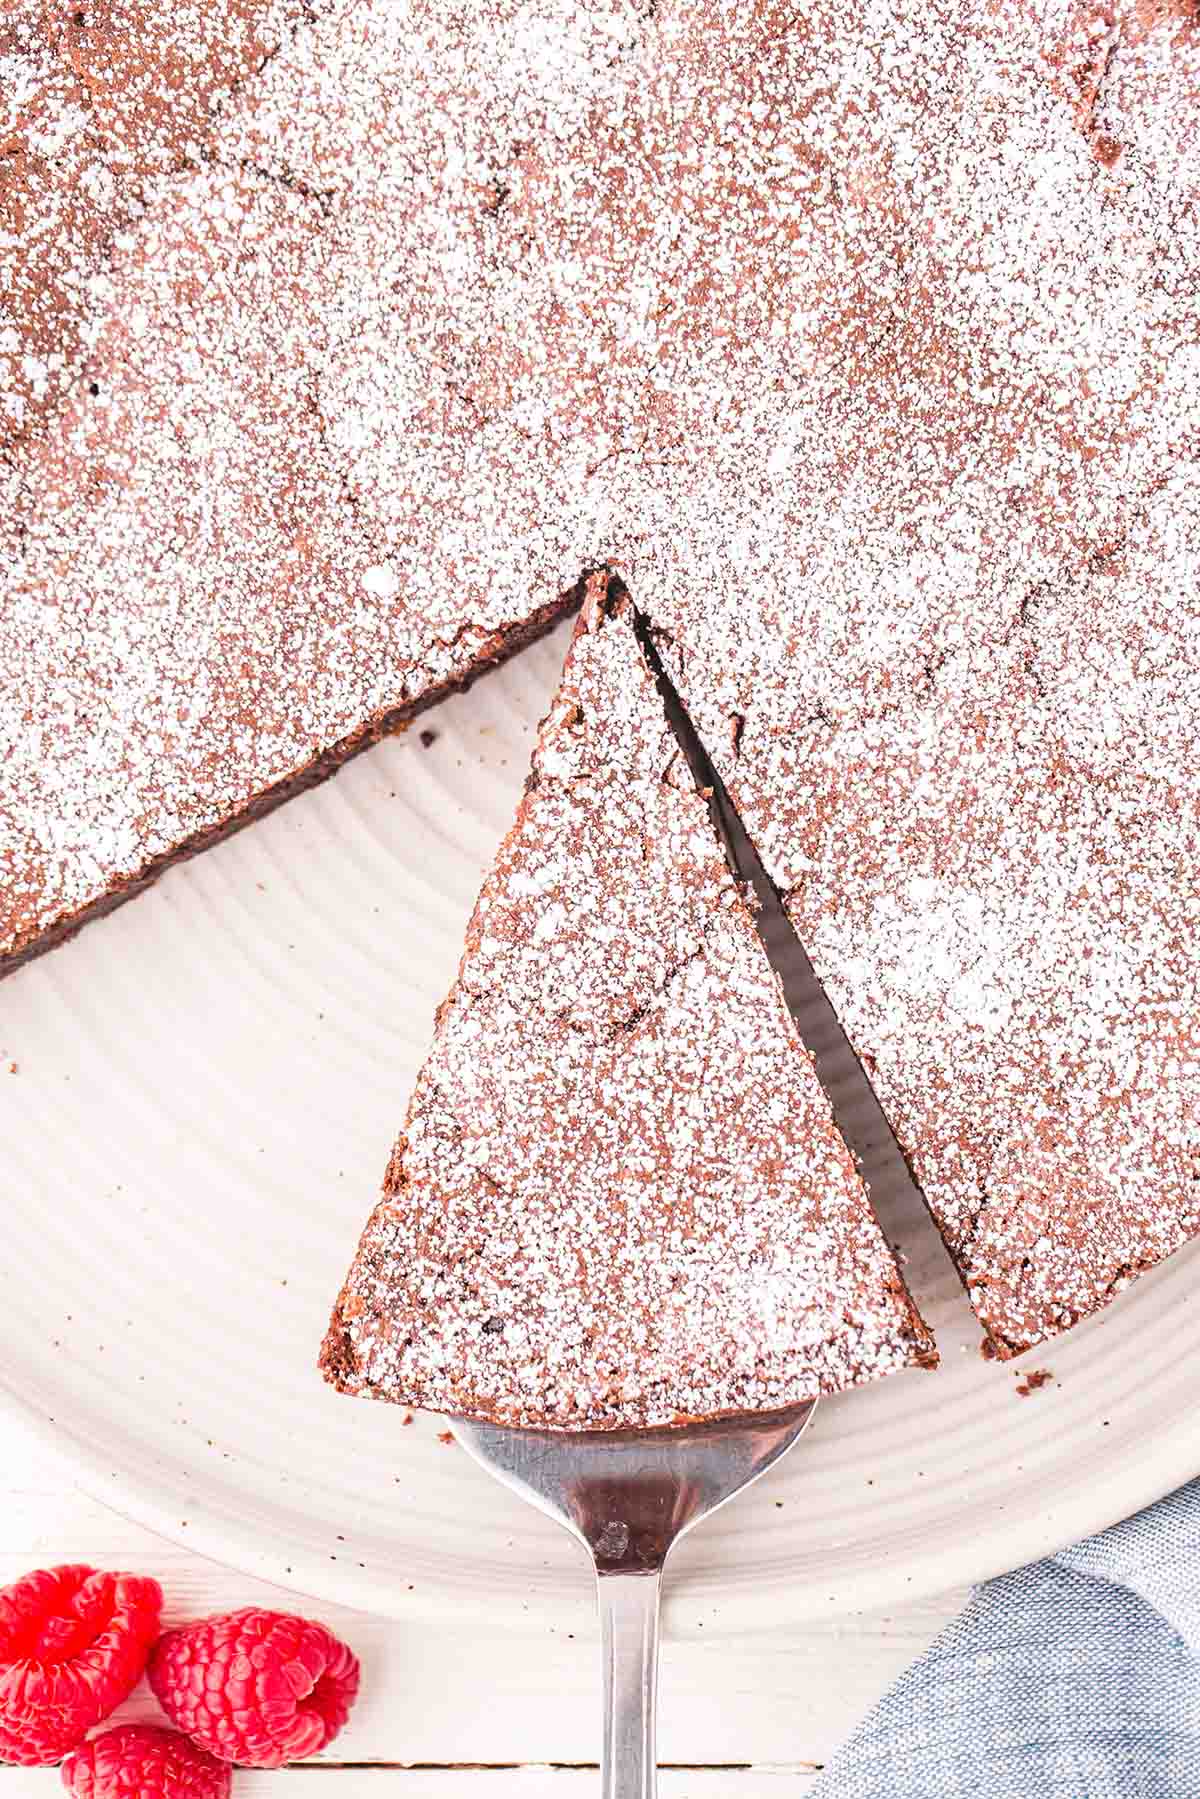 taking a slice of Flourless Chocolate Torte from a plate.